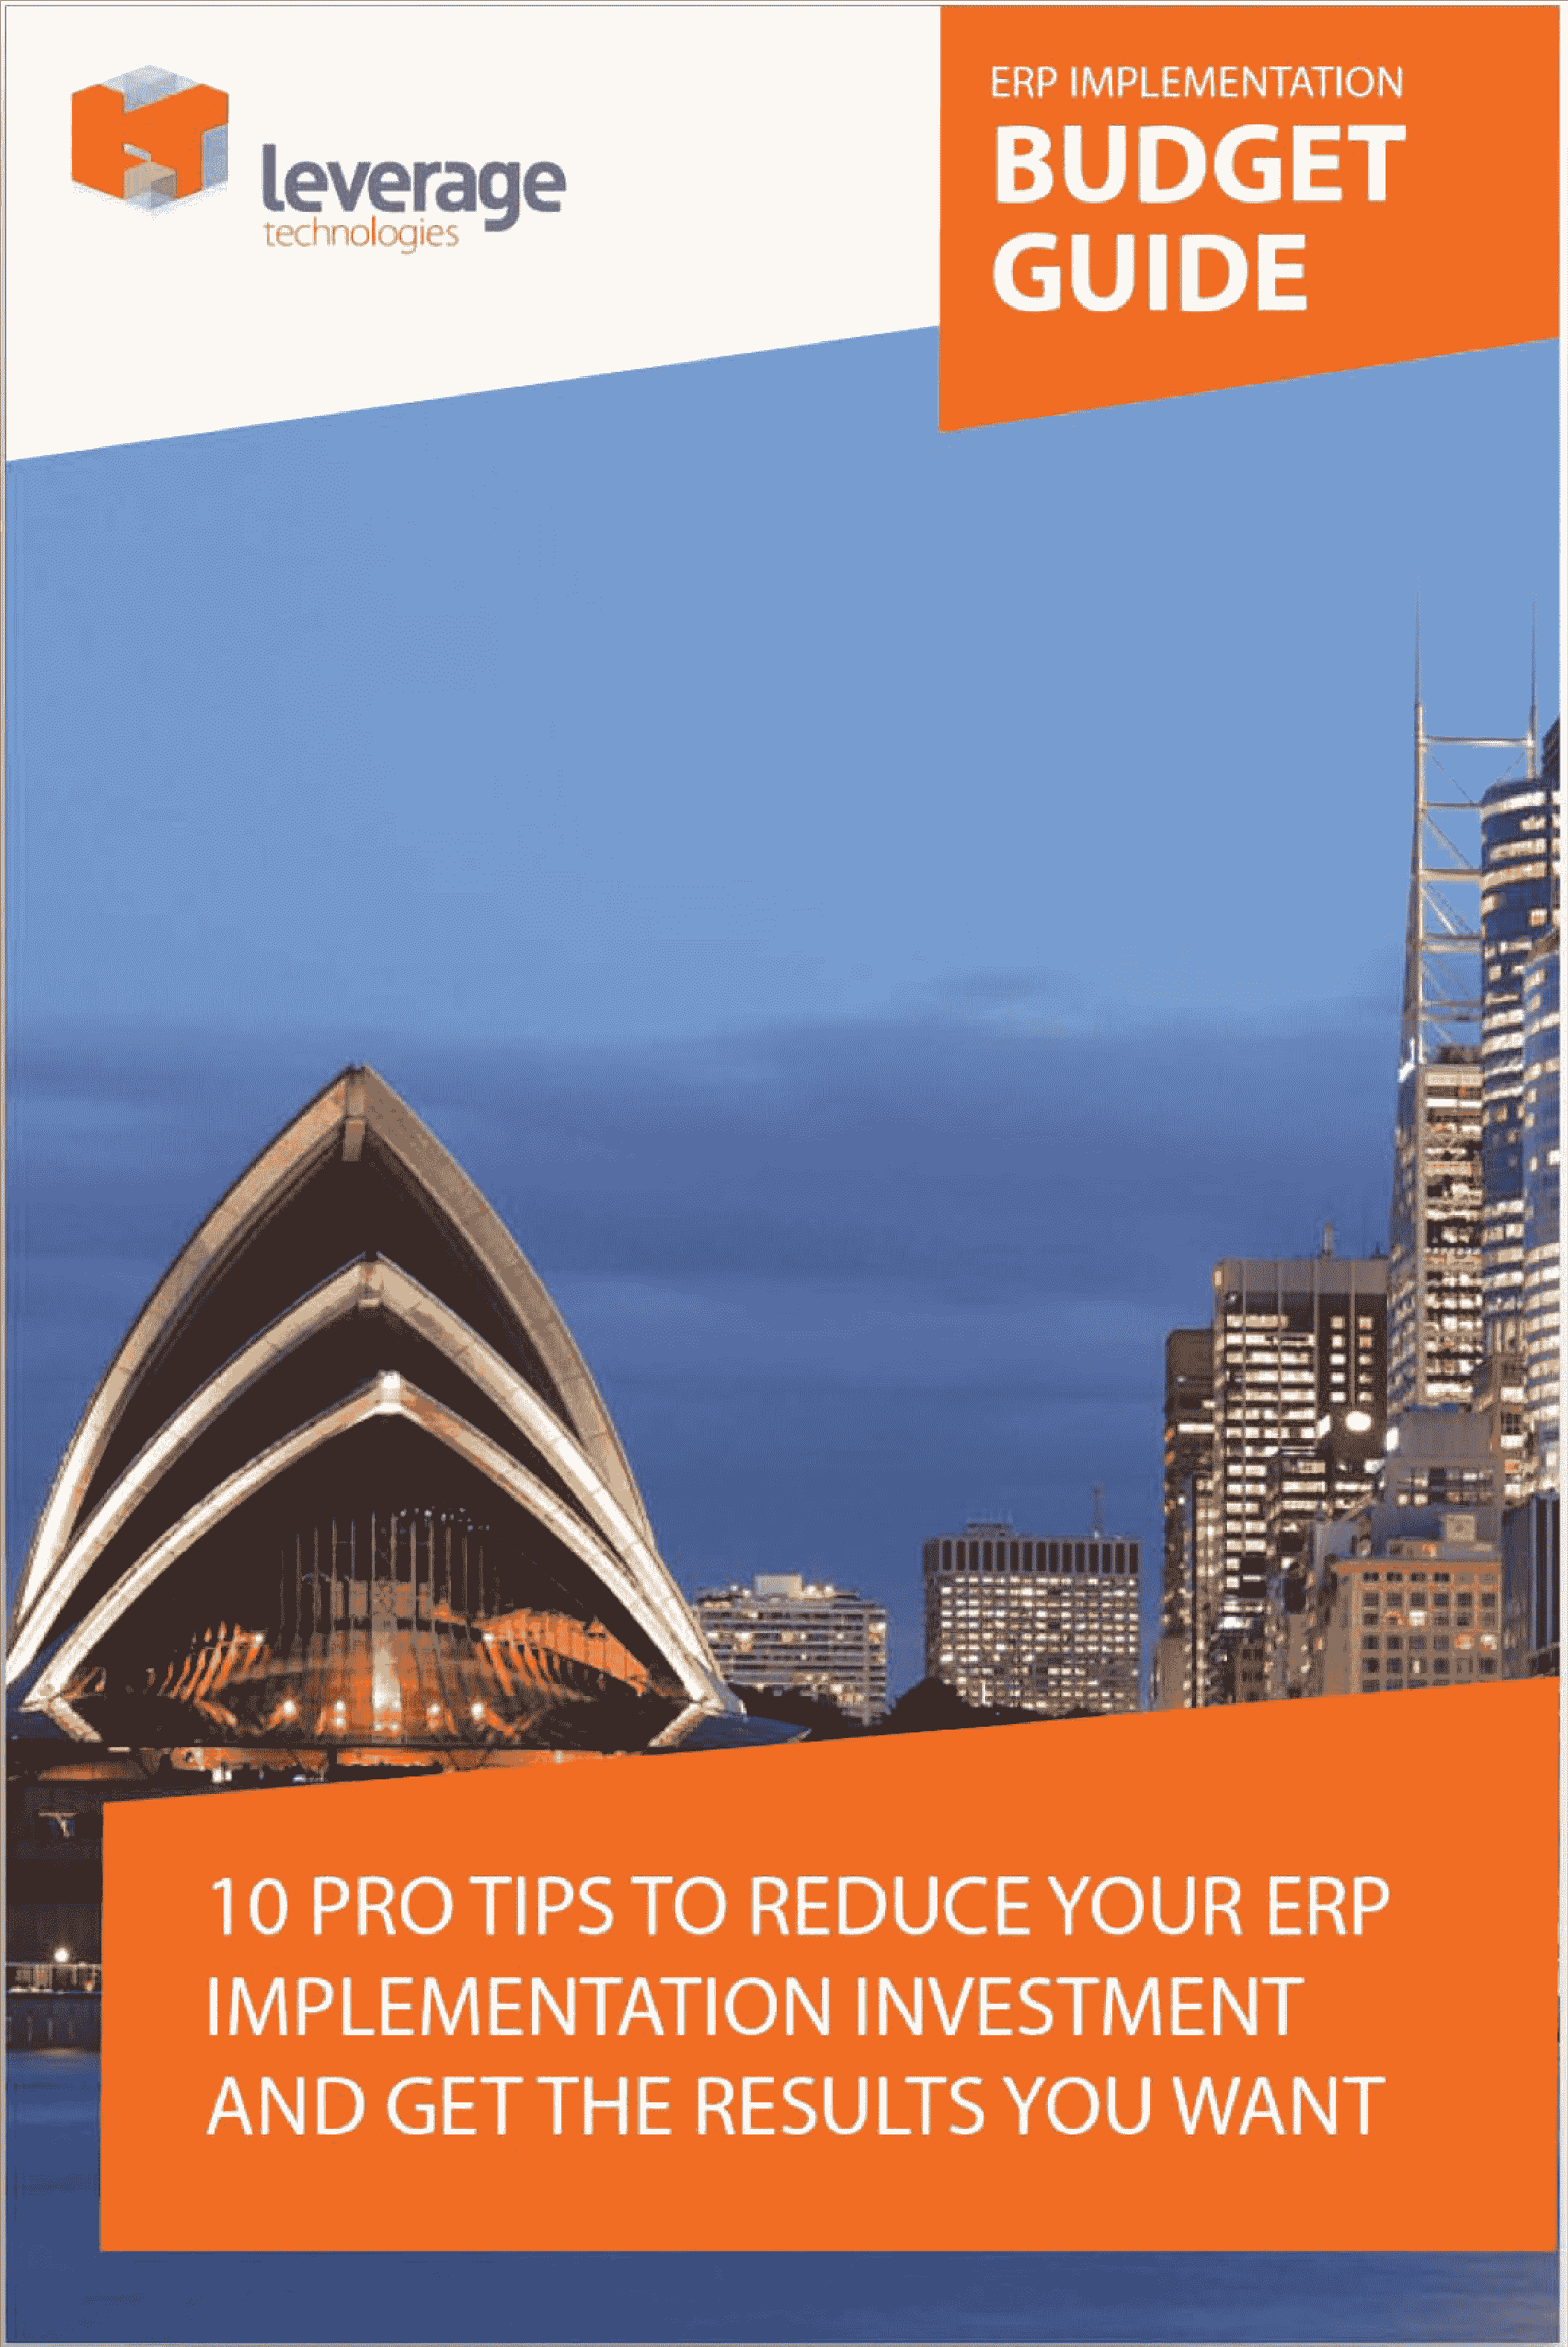 10 Pro Tips to Reduce your ERP Implementation Investment